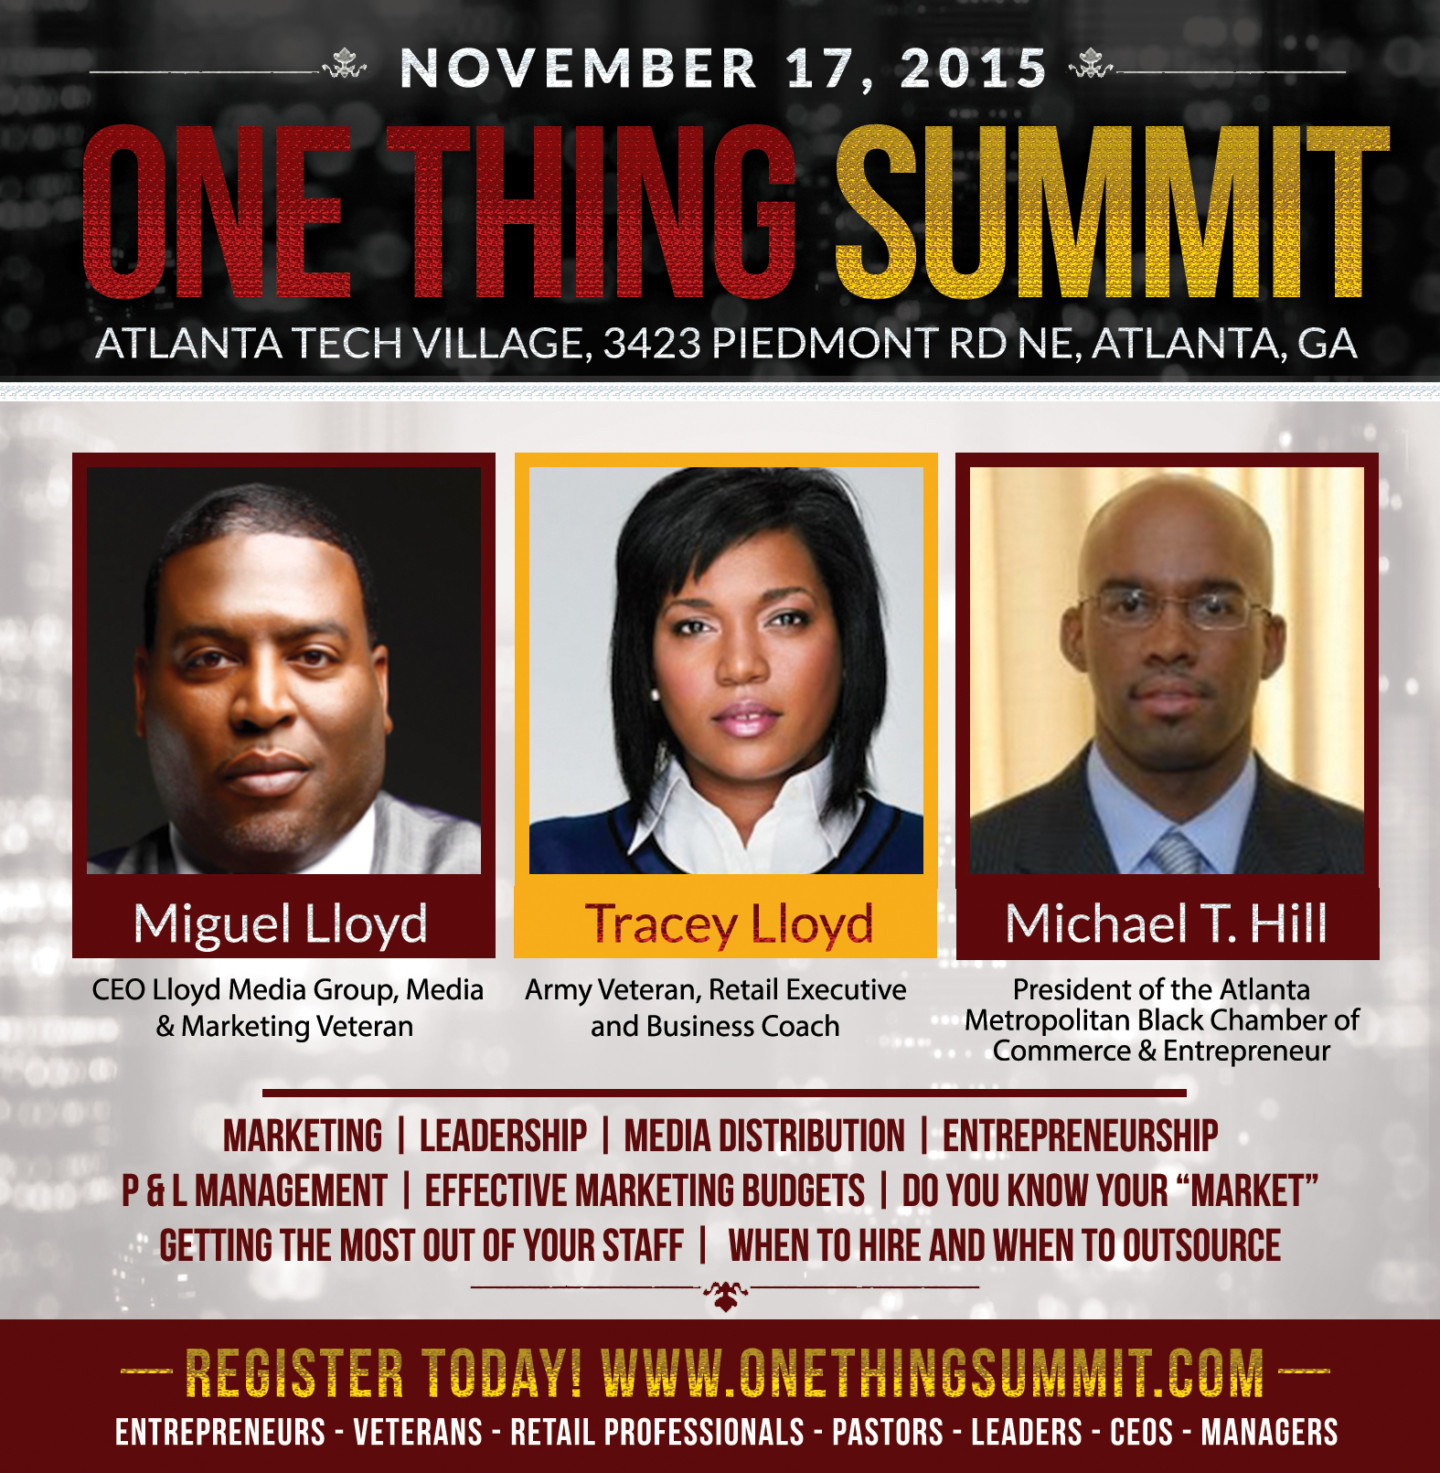 Lloyd Media Group Presents The One Thing Summit 2015